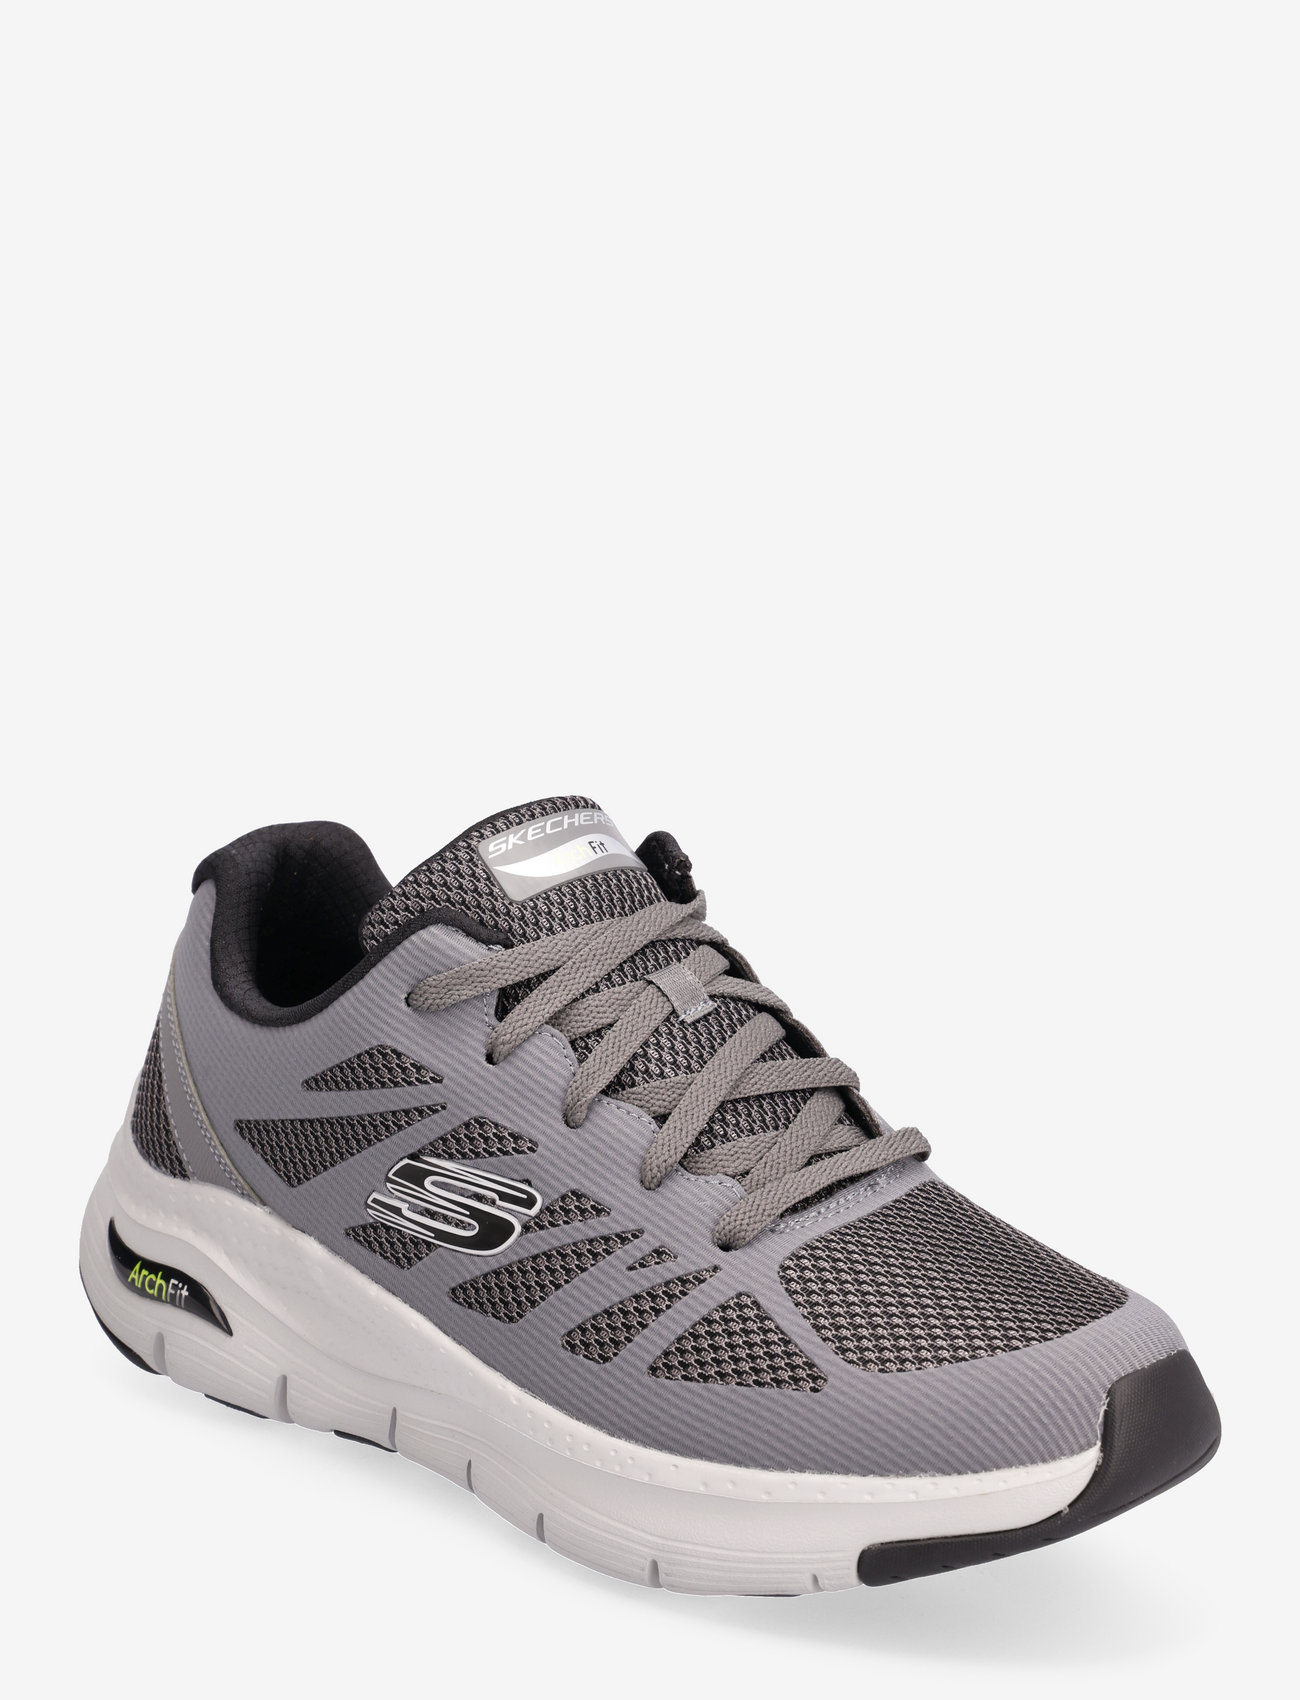 Skechers - Mens Arch Fit - Charge Back - låga sneakers - ccbk charcoal black - 0